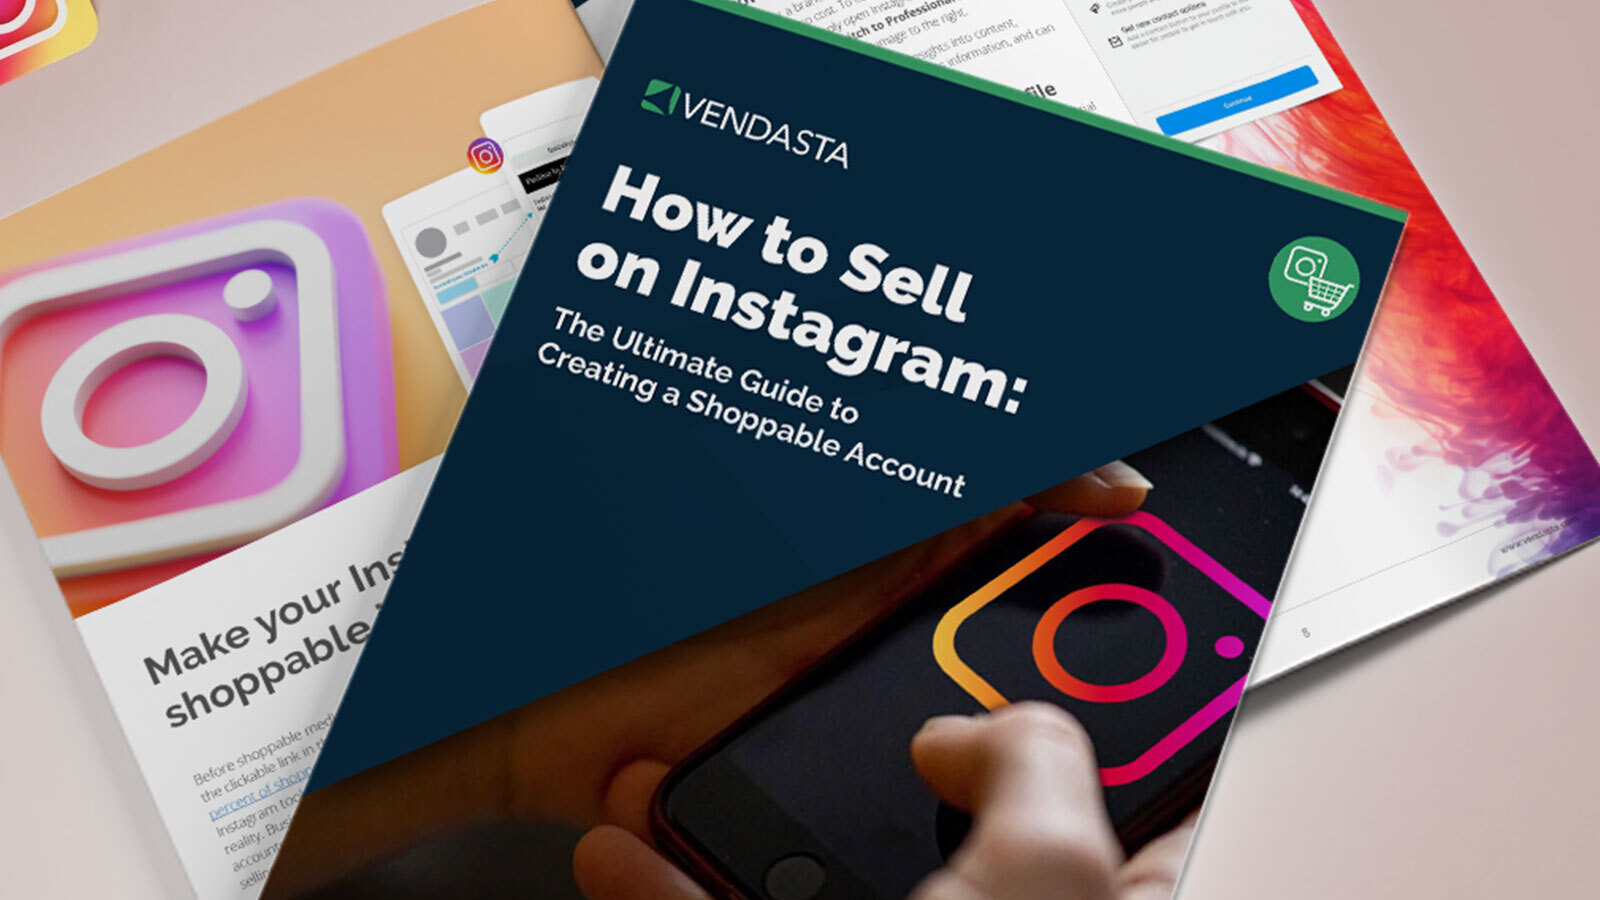 Vendasta’s guide, How to Sell on Instagram: The Ultimate Guide to Creating a Shoppable Account, pictured as a physical booklet with the title and a smartphone displaying the Instagram app logo.